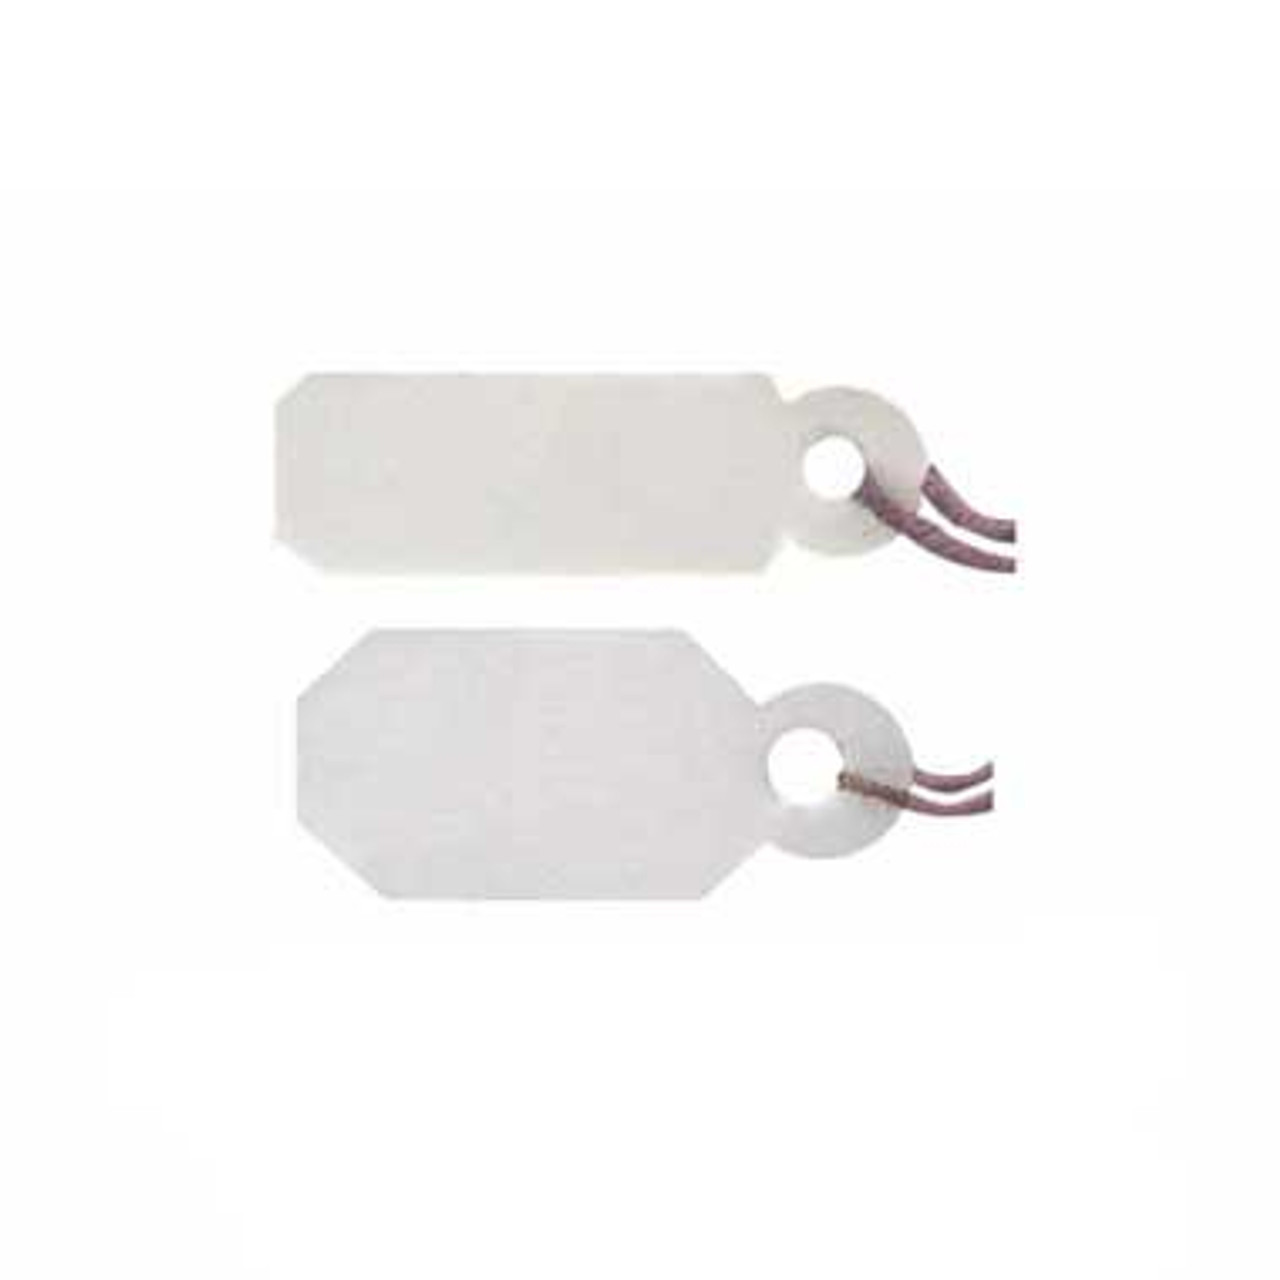 Grobet Jewelry String Tags White Pkg of 1,000 Tags 1m (Choose Style) | Esslinger